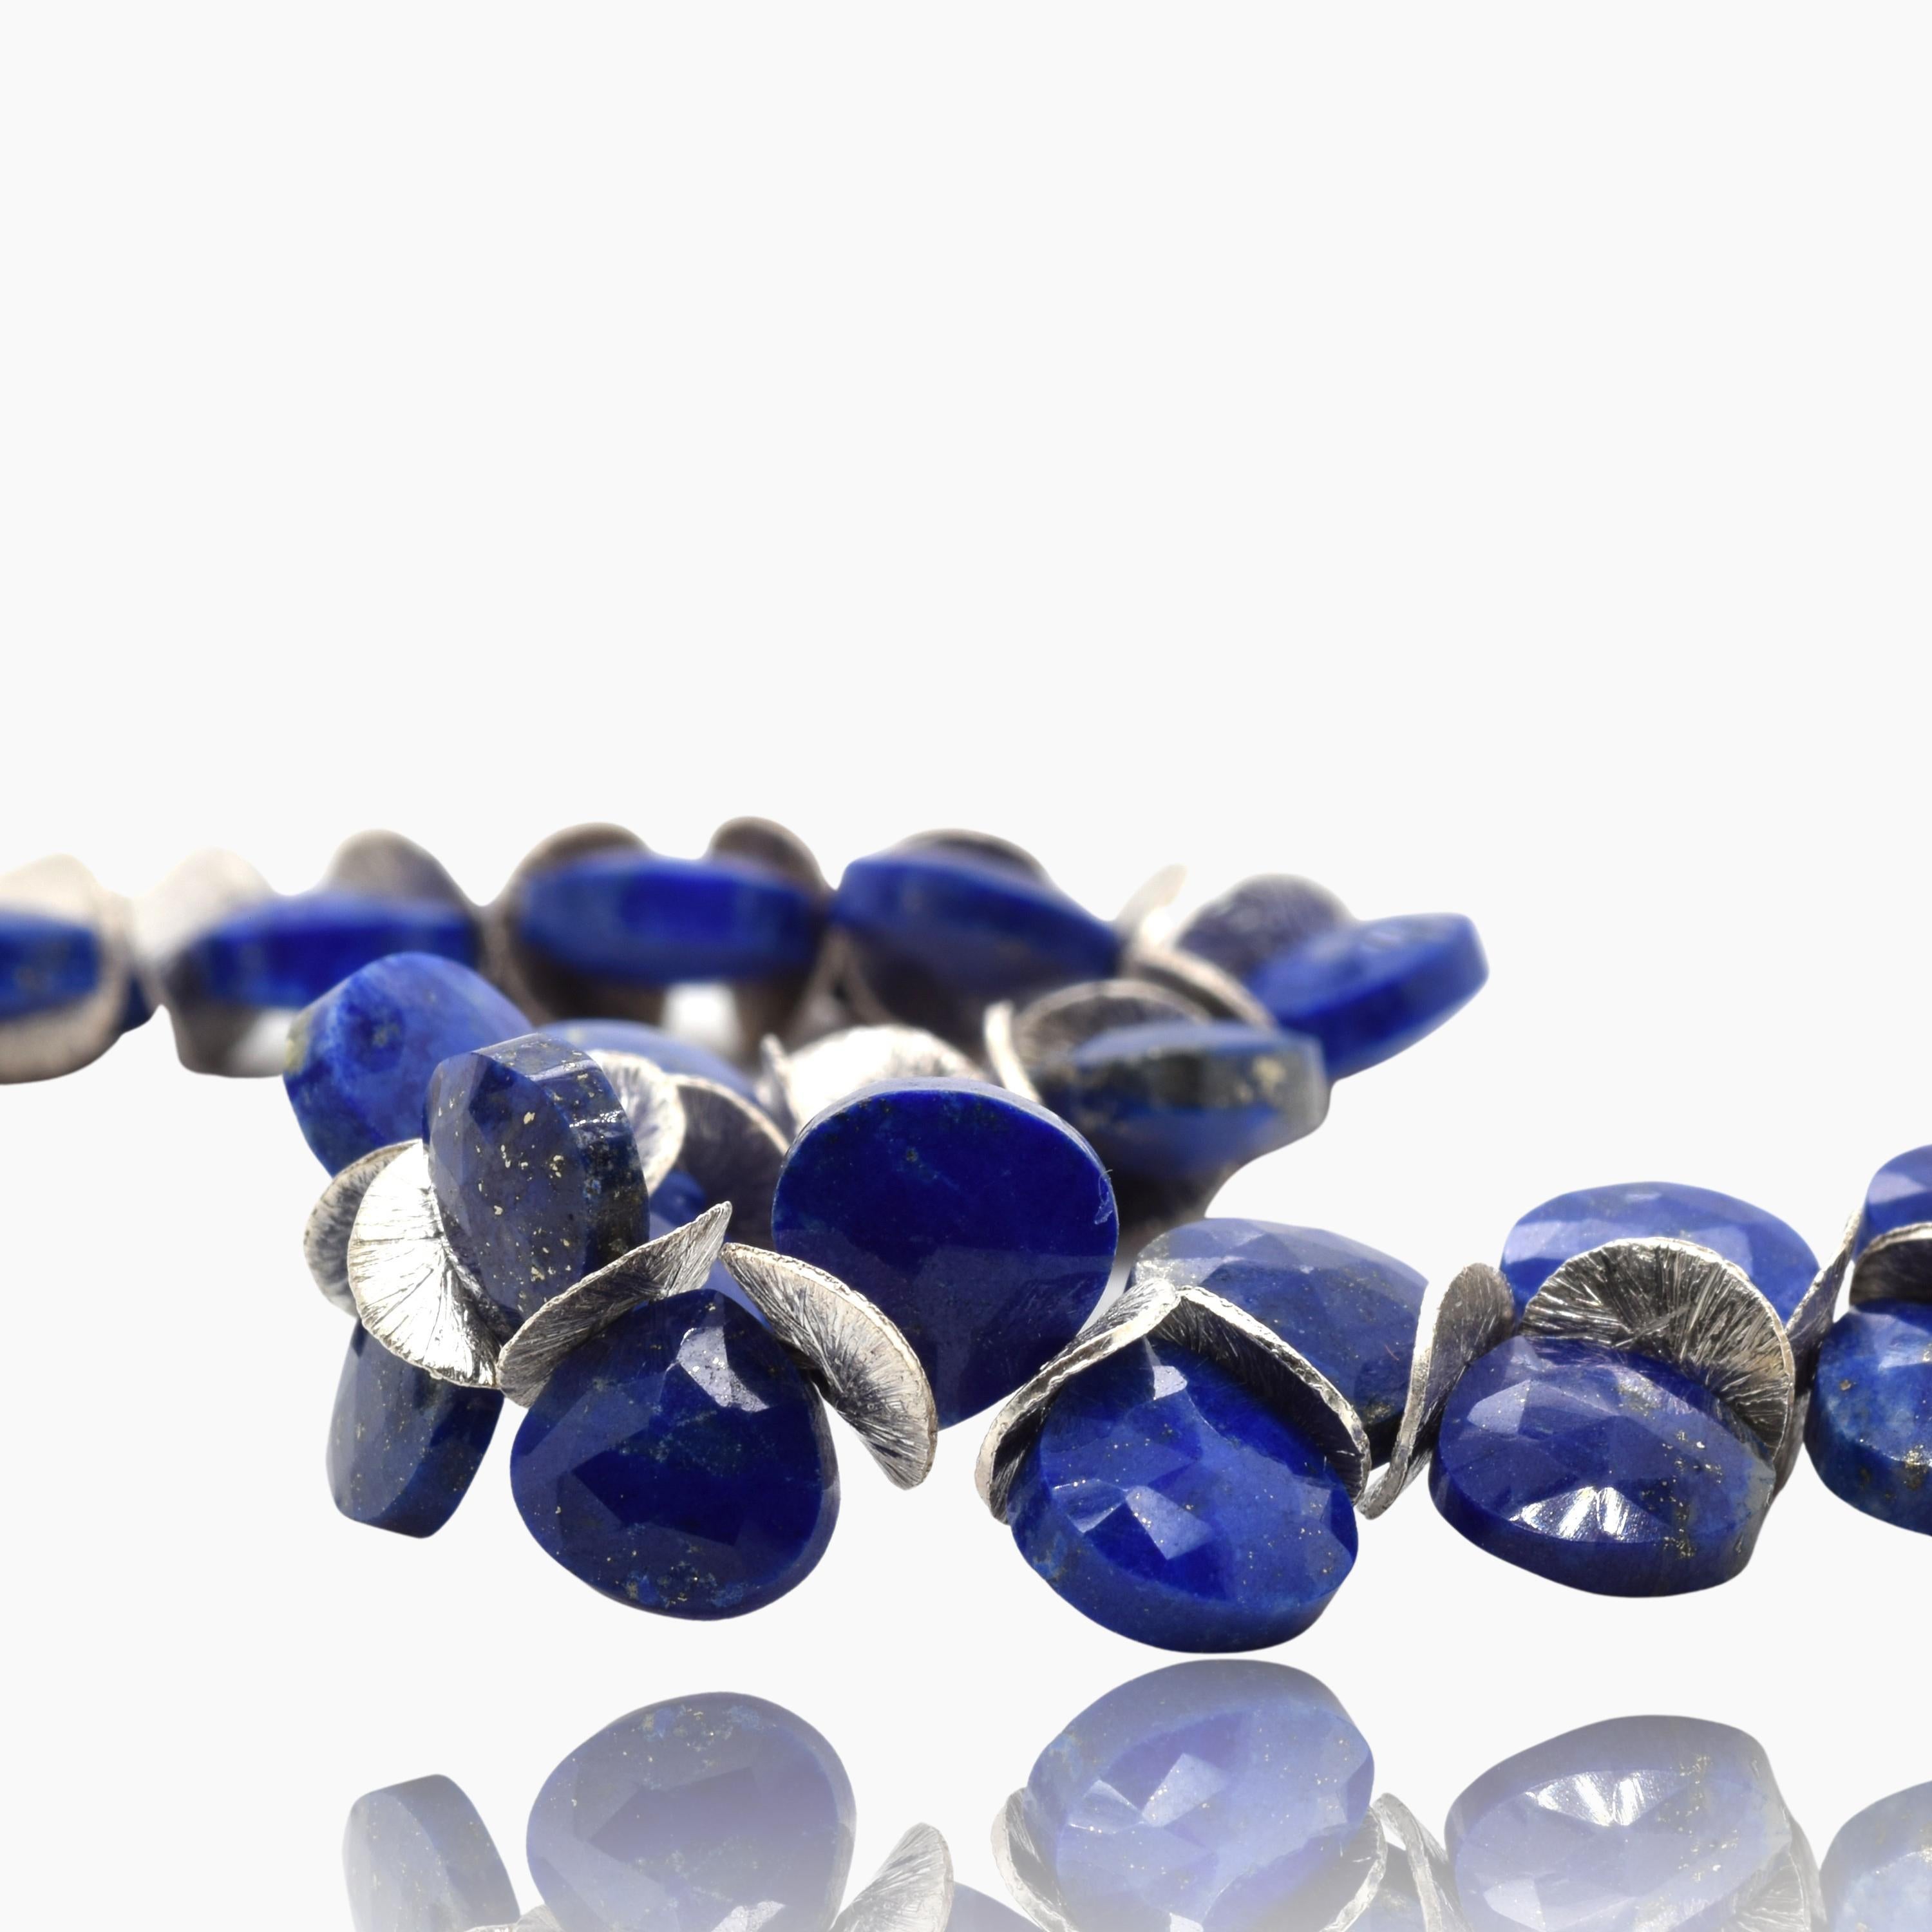 My signature bracelet with dark blue faceted lapis gems with sterling silver discs and a sterling spring ring clasp. Wear casually or dressed up -- it can go either way! Available in Small (6-7